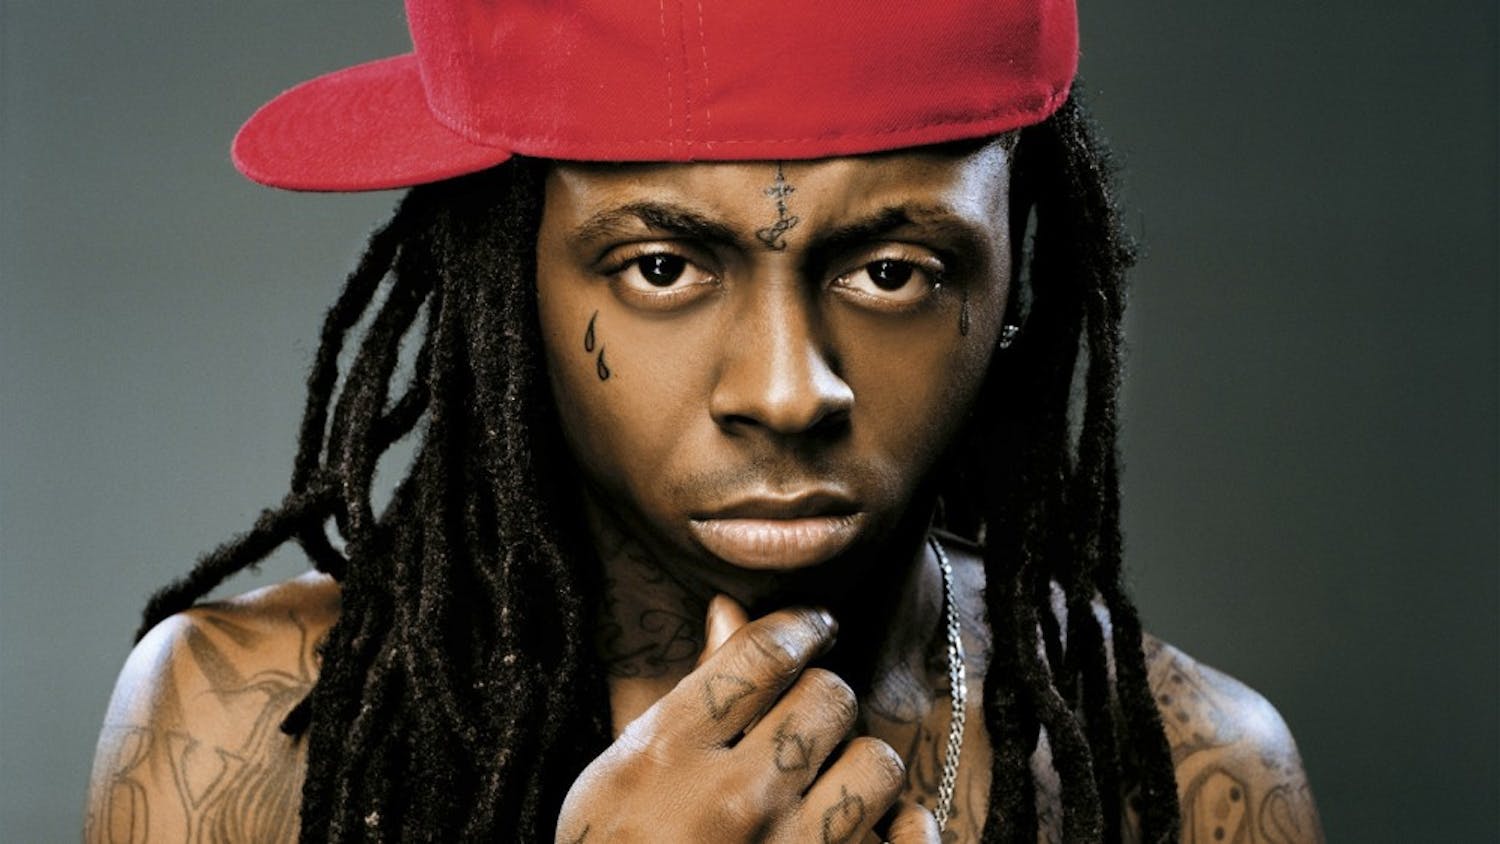 	Lil Wayne released his 10th full-length album, “I Am Not A Human Being II,” Tuesday. The artist, known for singles like “Hustler Musik,” said this will be the second to last CD of his career.